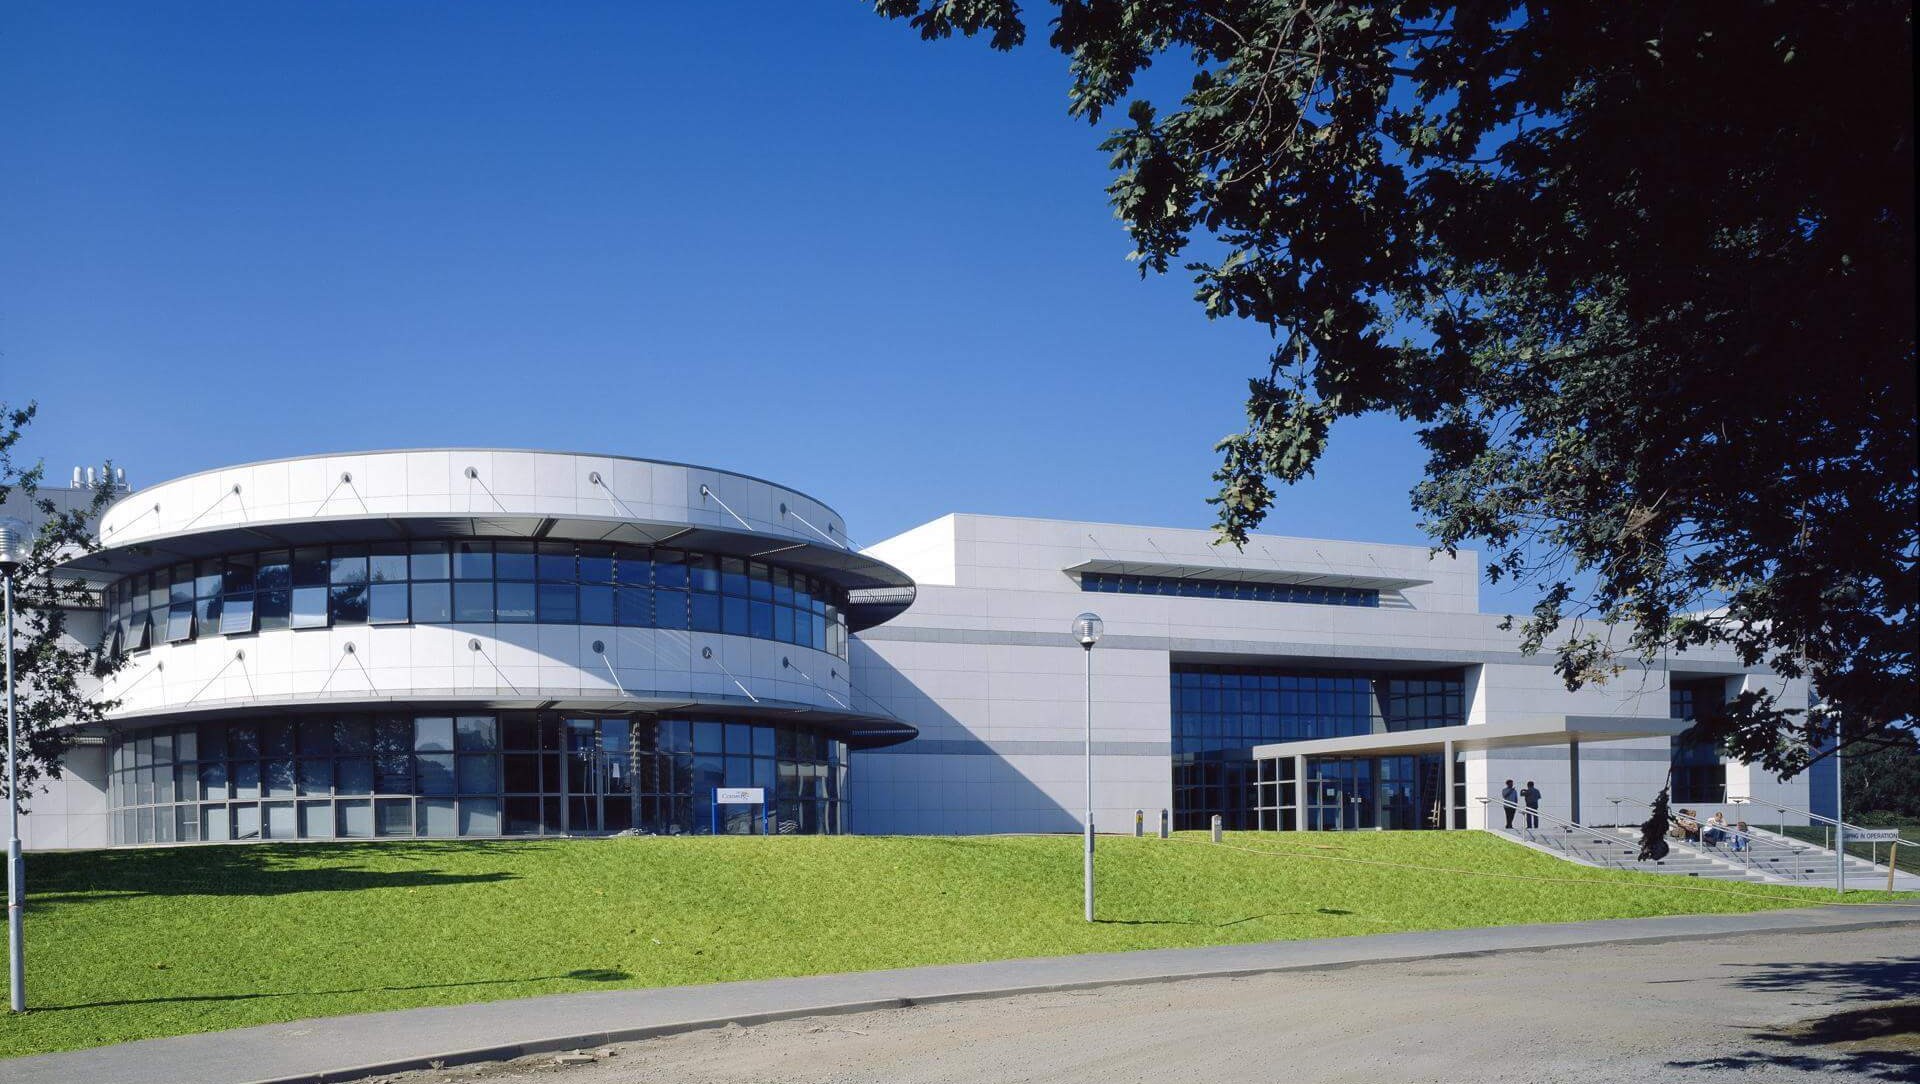 A picture of the conway institute. It is a two story white building with a circular section at the front. In front of the building, there is a grass verge.